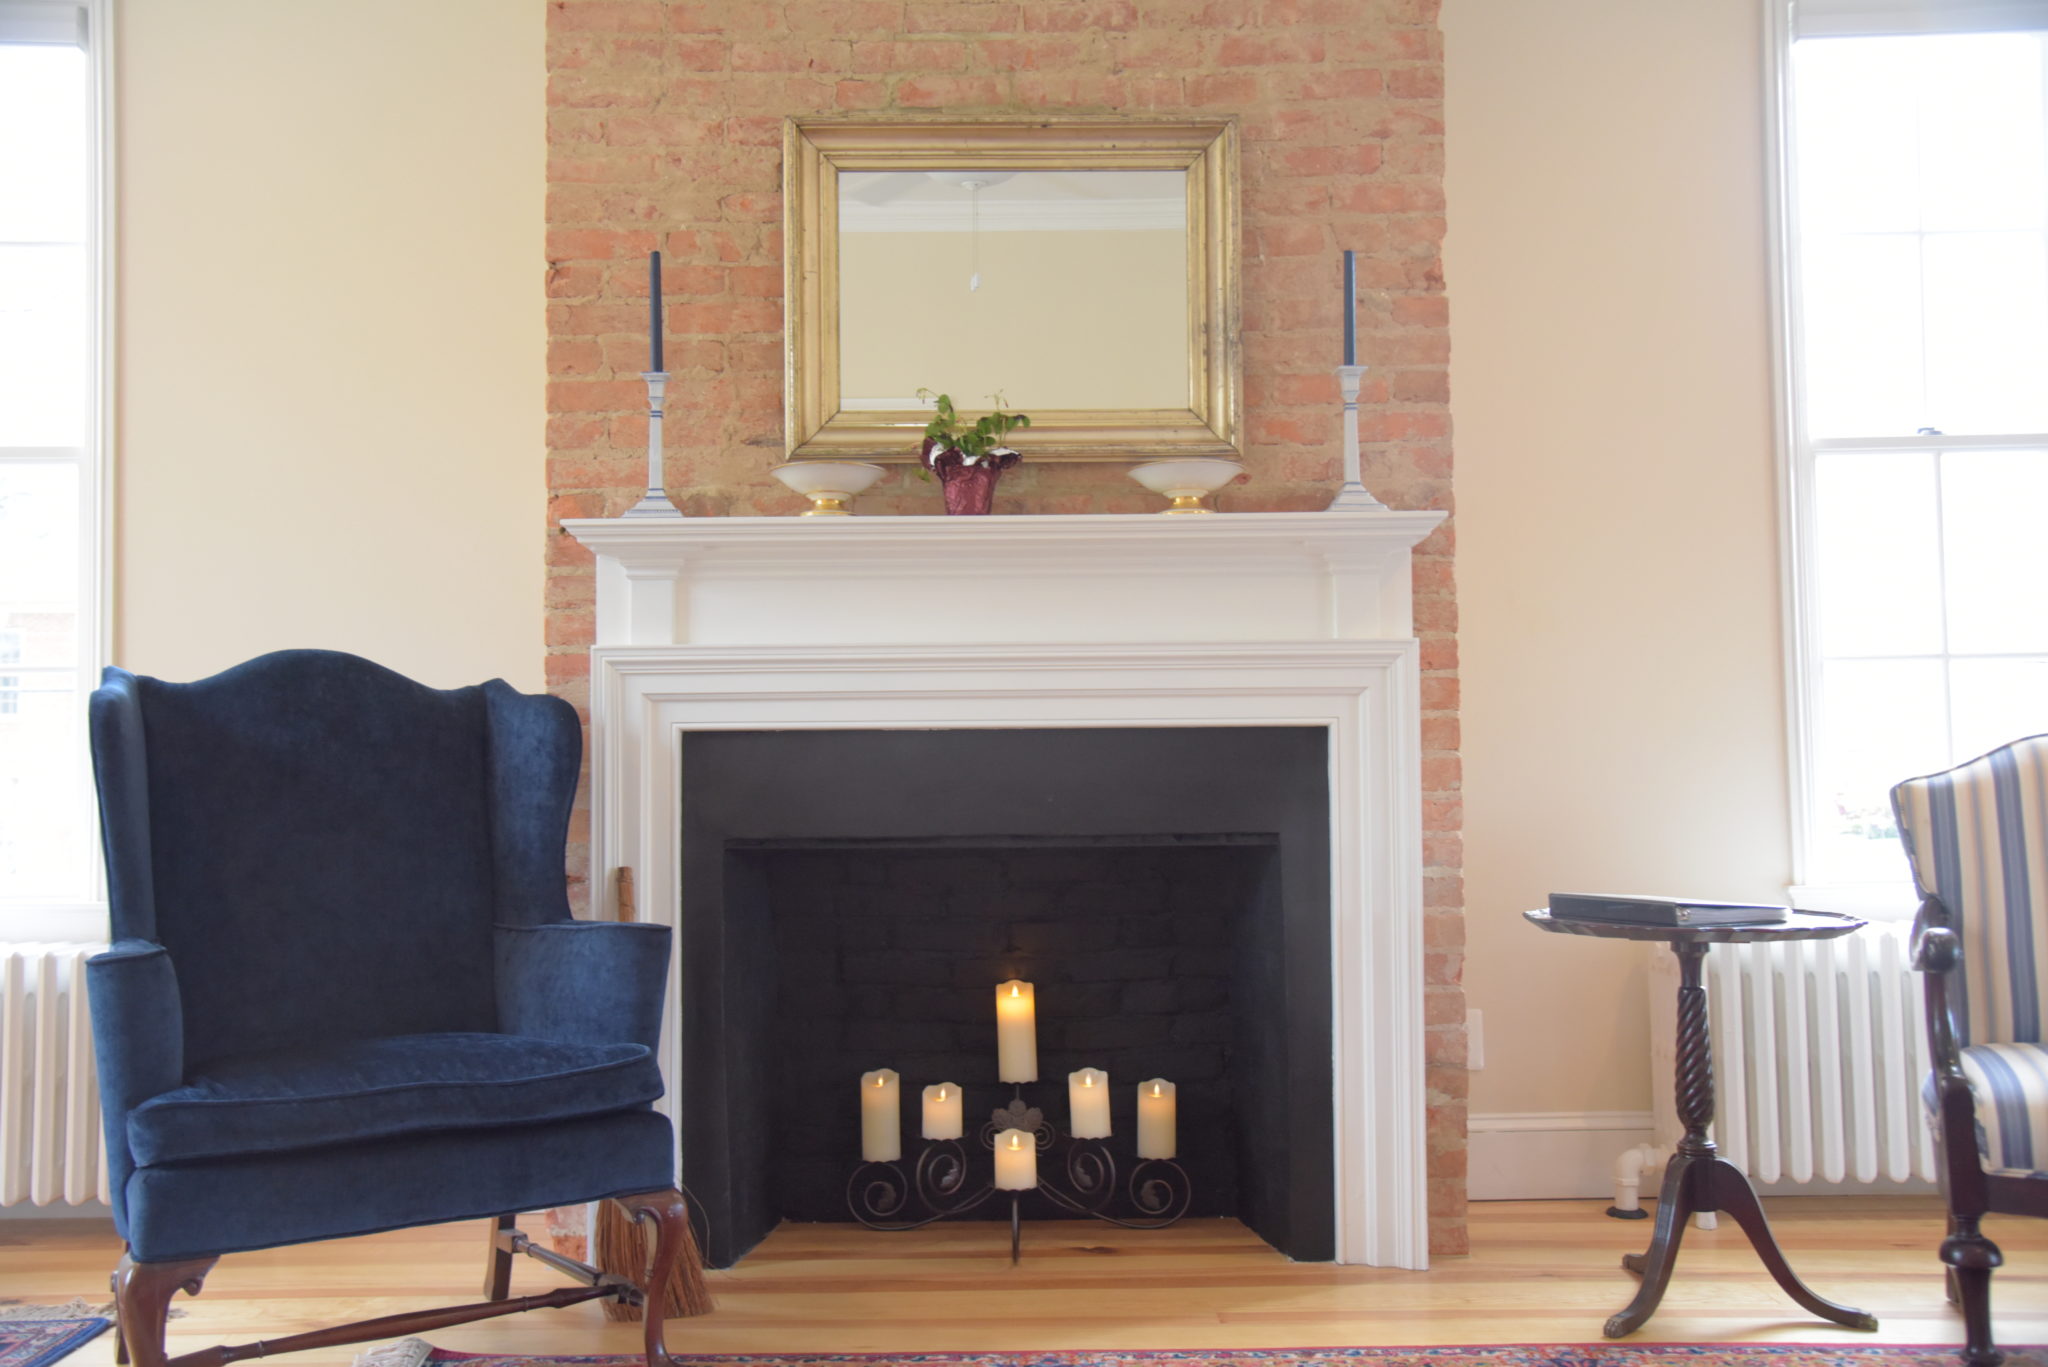 A brick fireplace surrounded by antique furniture